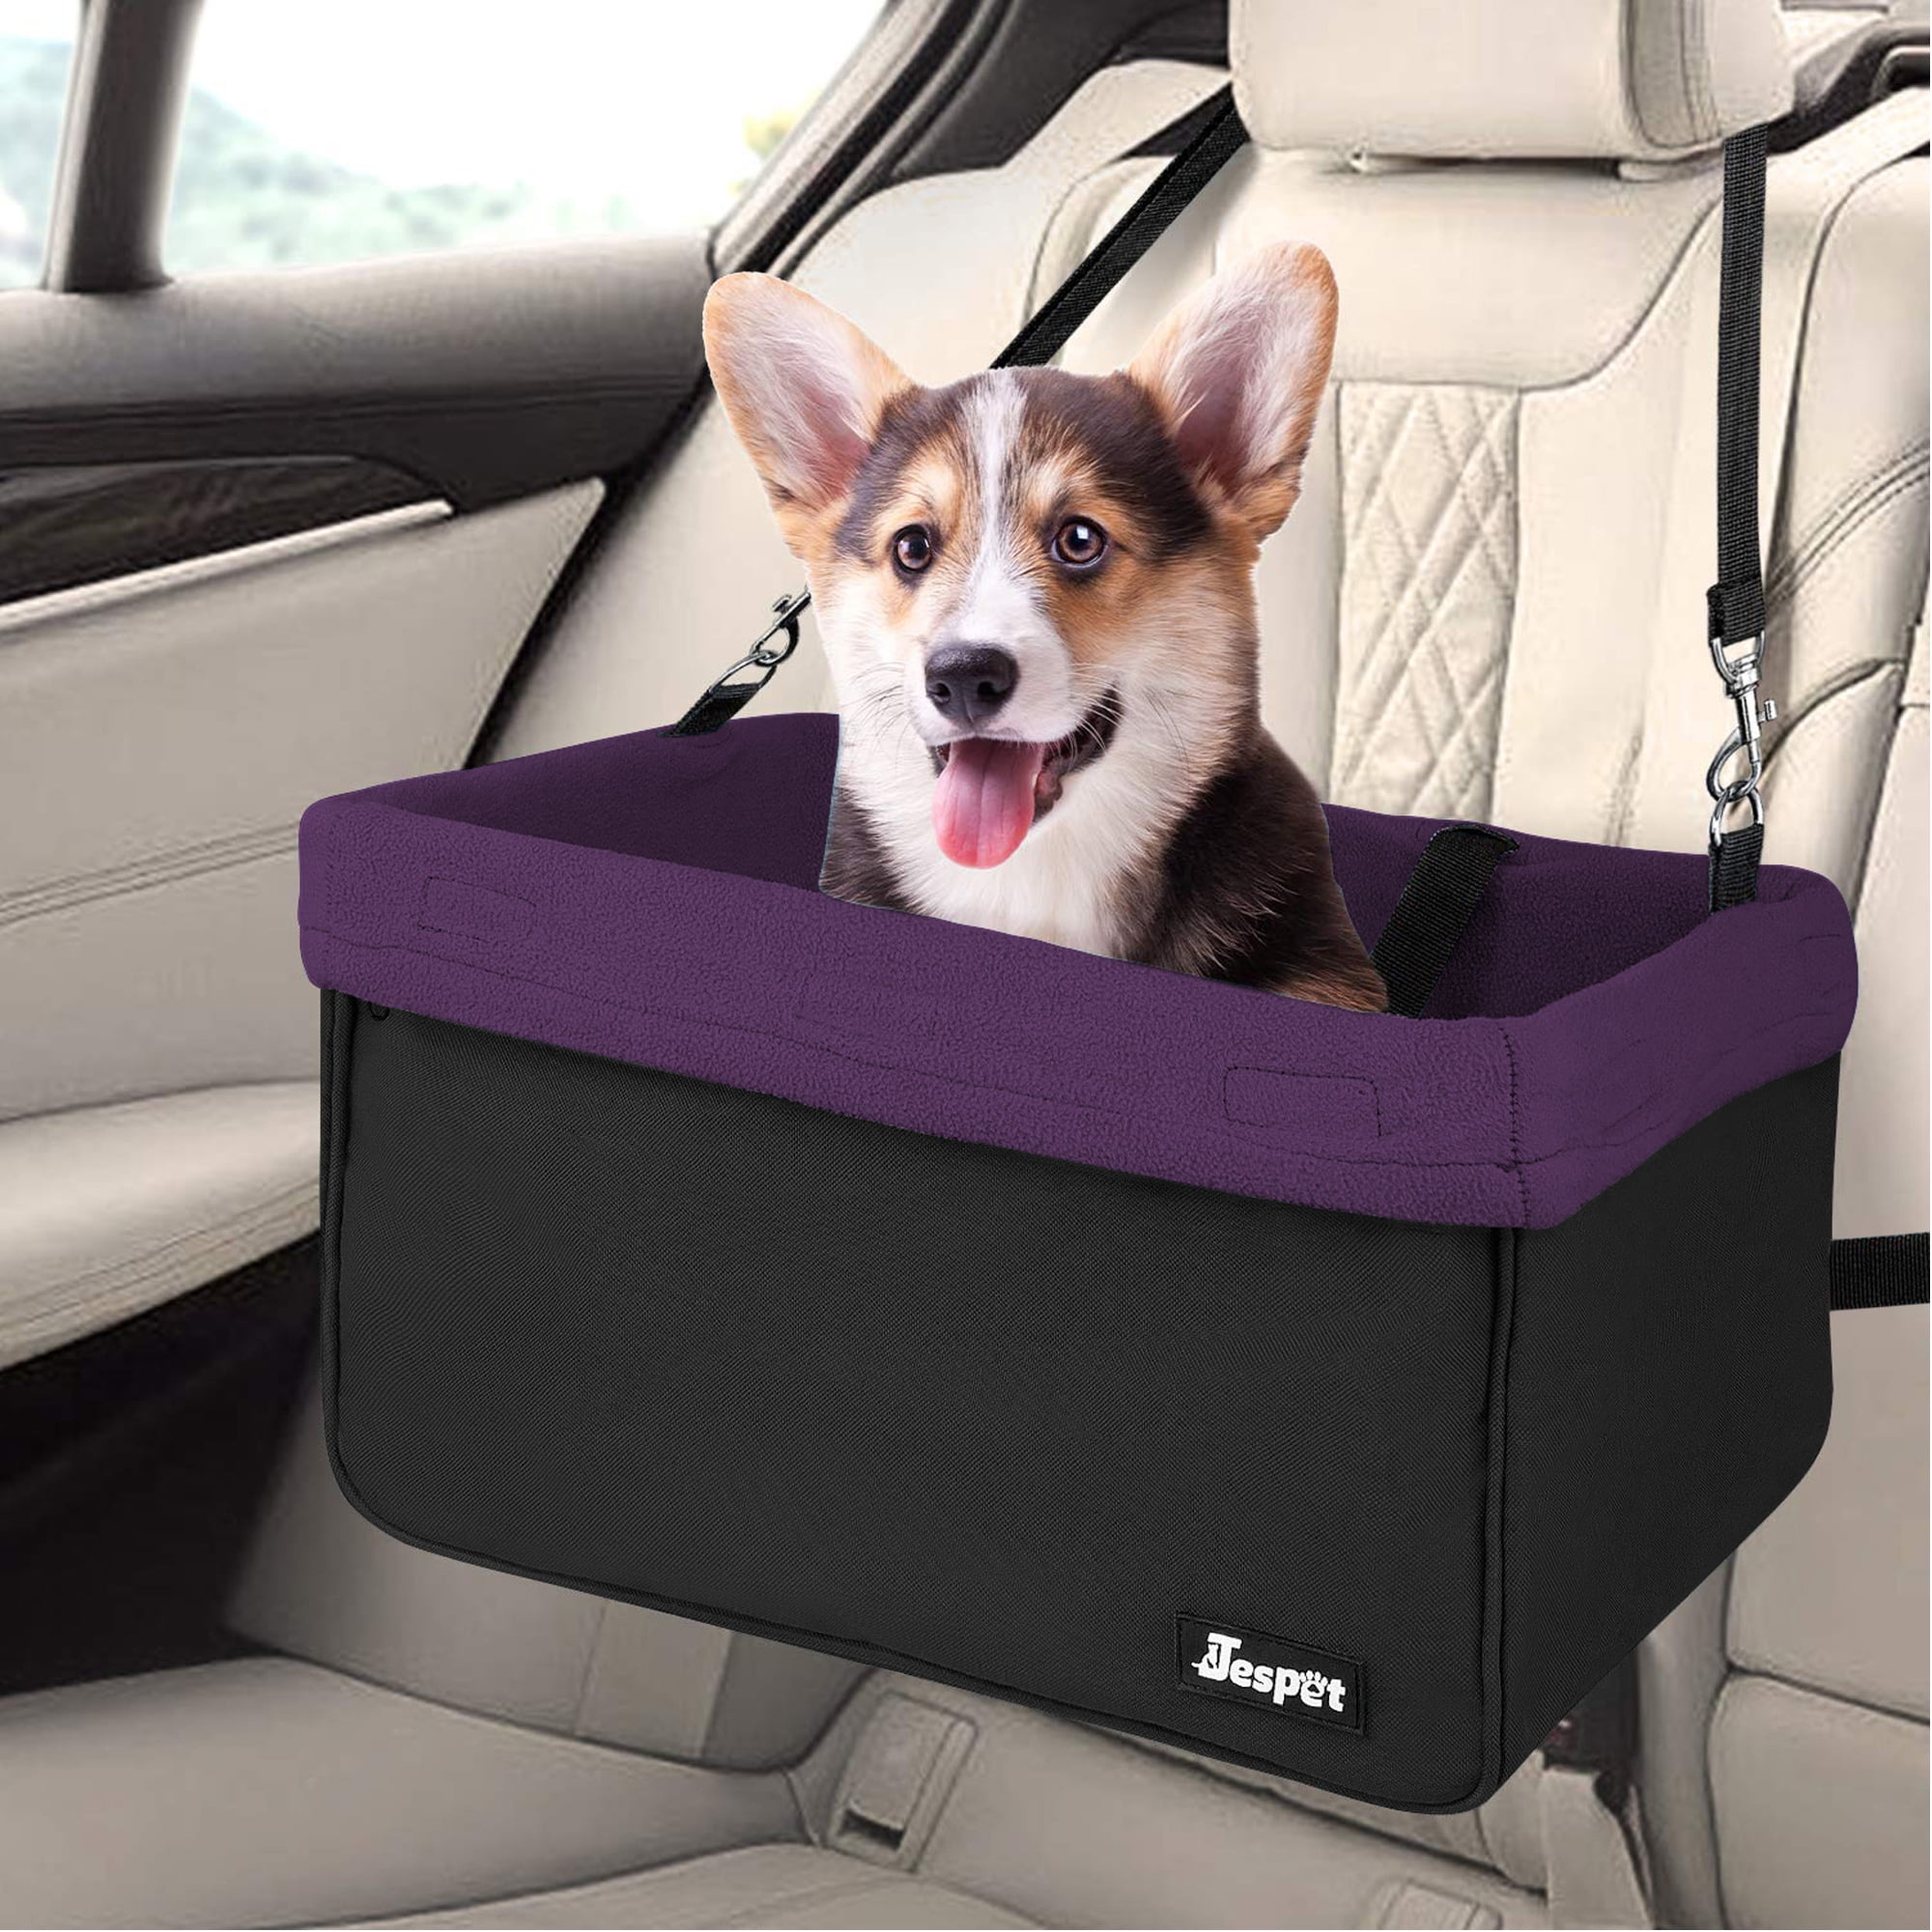 2020 New Reinforce Metal Frame Pet Car Seat for Small Medium Doggie Cat up to 15lbs Portable Collapsible Puppy Carrier SlowTon Dog Booster Car Seat Safer Travel with Top Cover & Seatbelt 